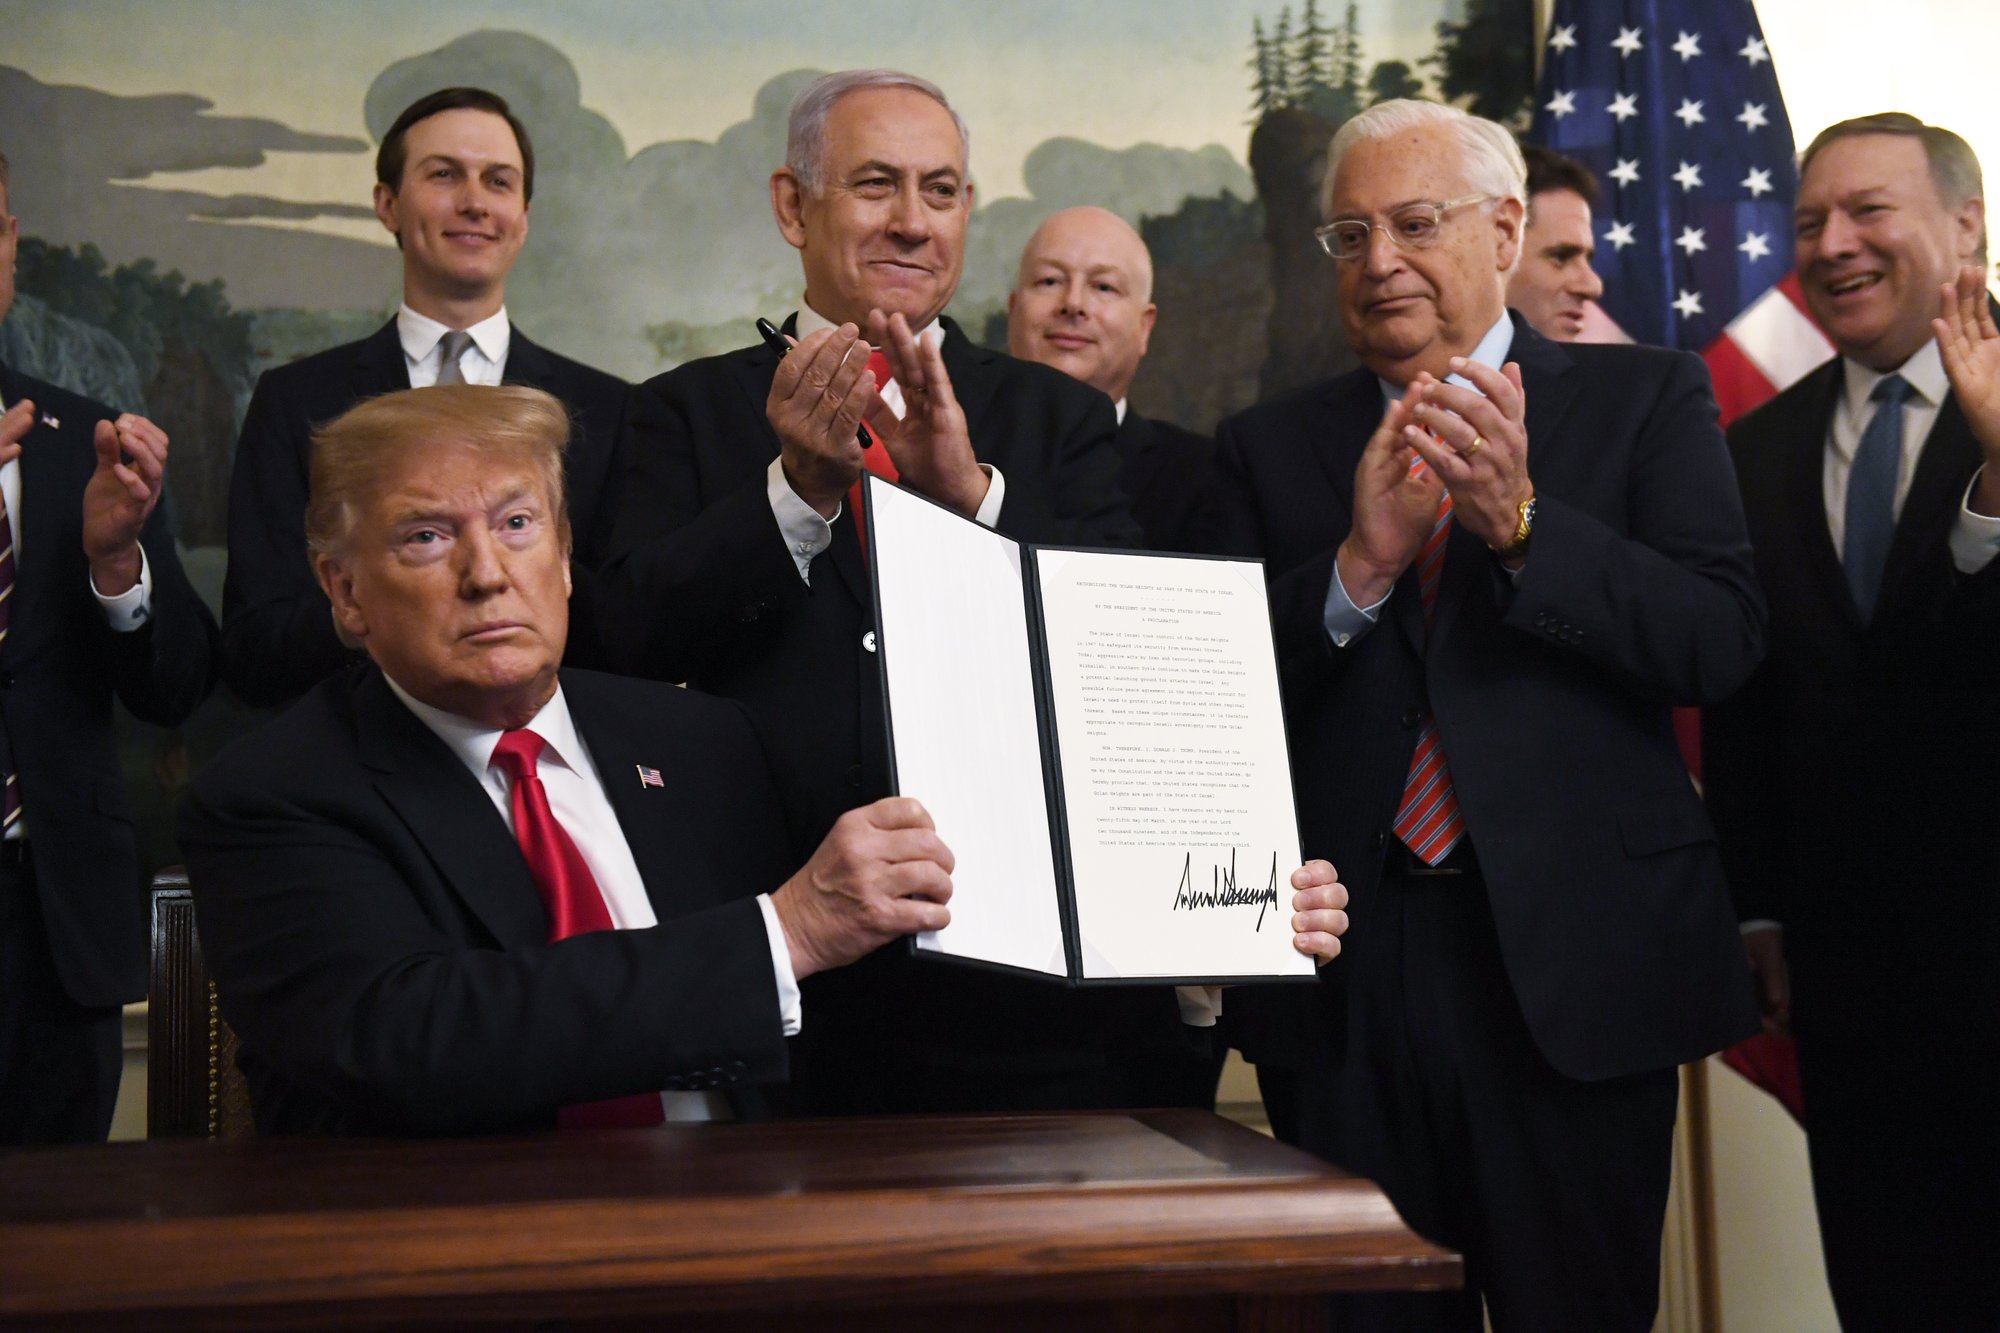 https://cdn.winknews.com/wp-content/uploads/2019/03/resident-Donald-Trump-holds-up-a-signed-proclamation-recognizing-Israels-sovereignty-over-the-Golan-Heights.-Credit-AP.jpeg